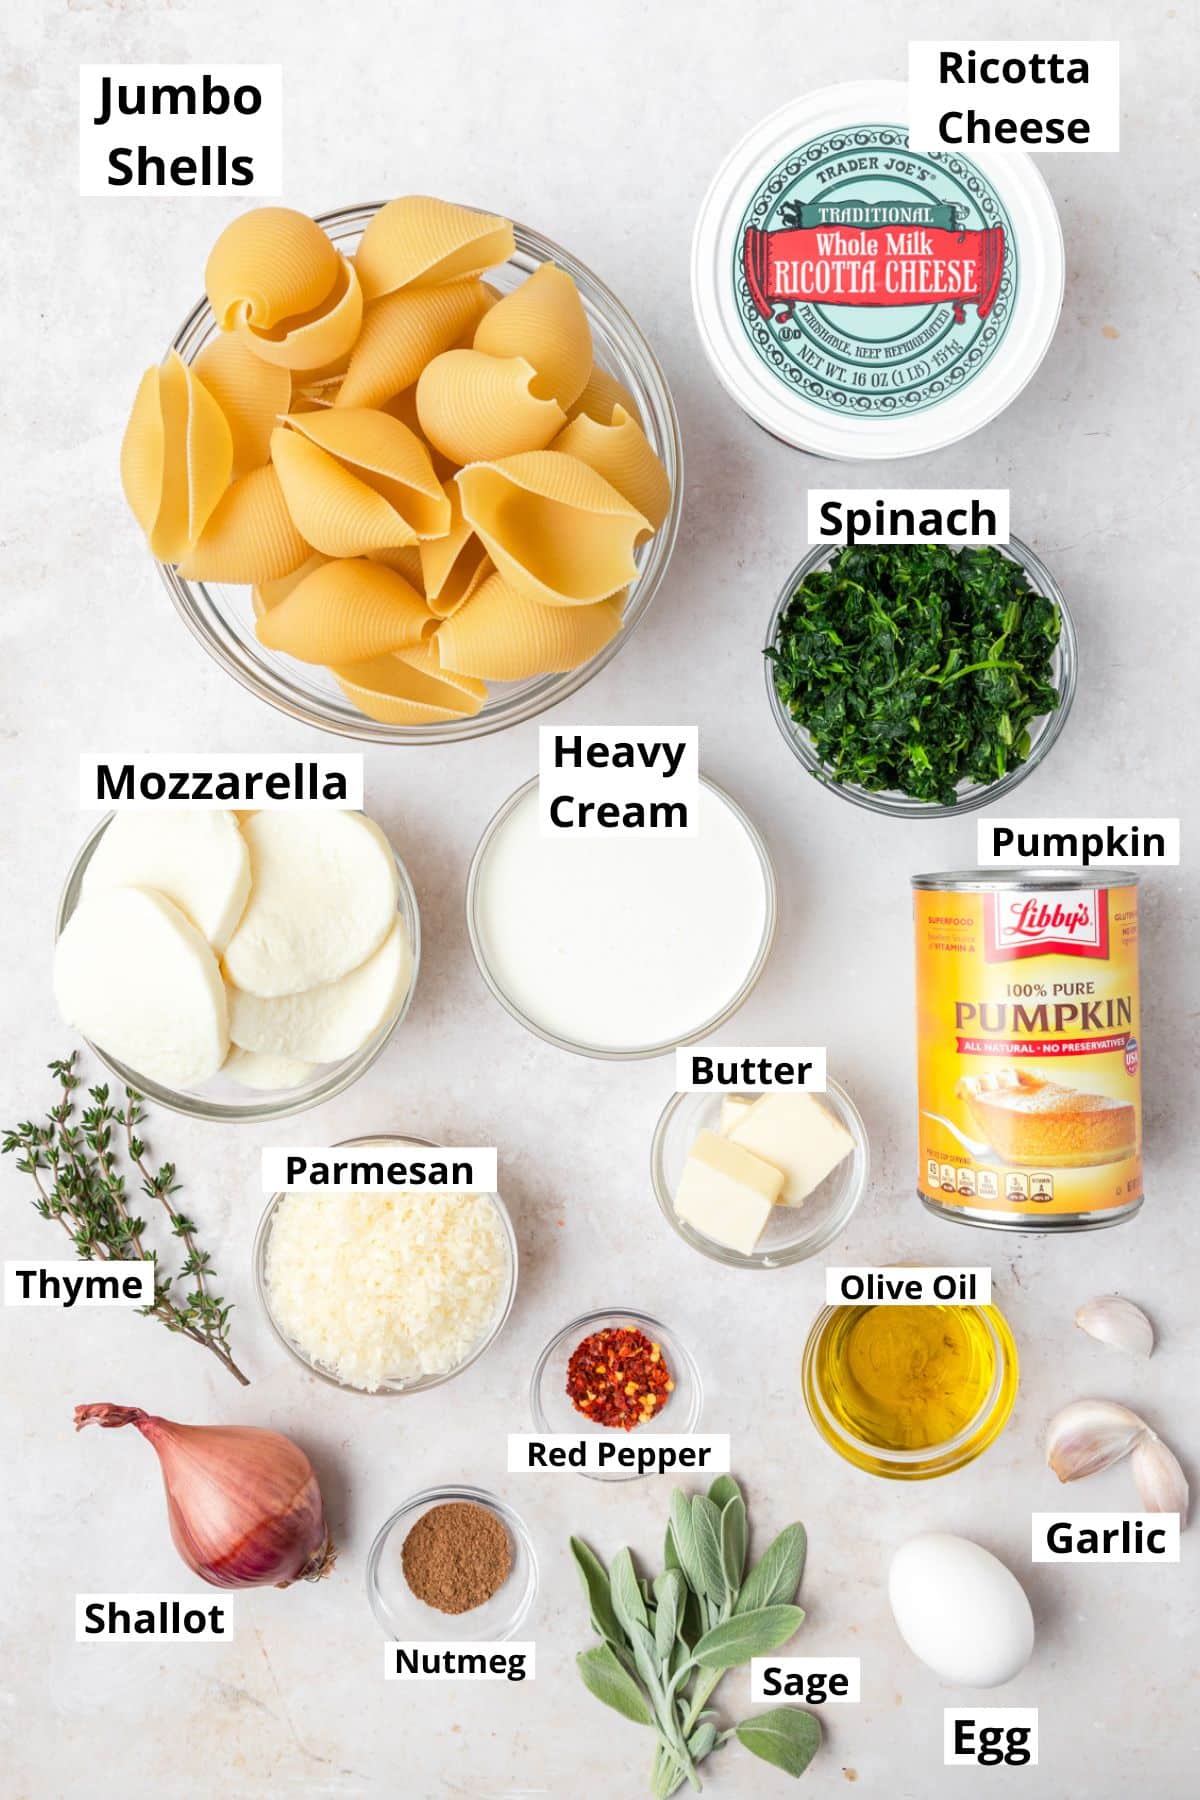 labeled ingredients for pumpkin stuffed shells.